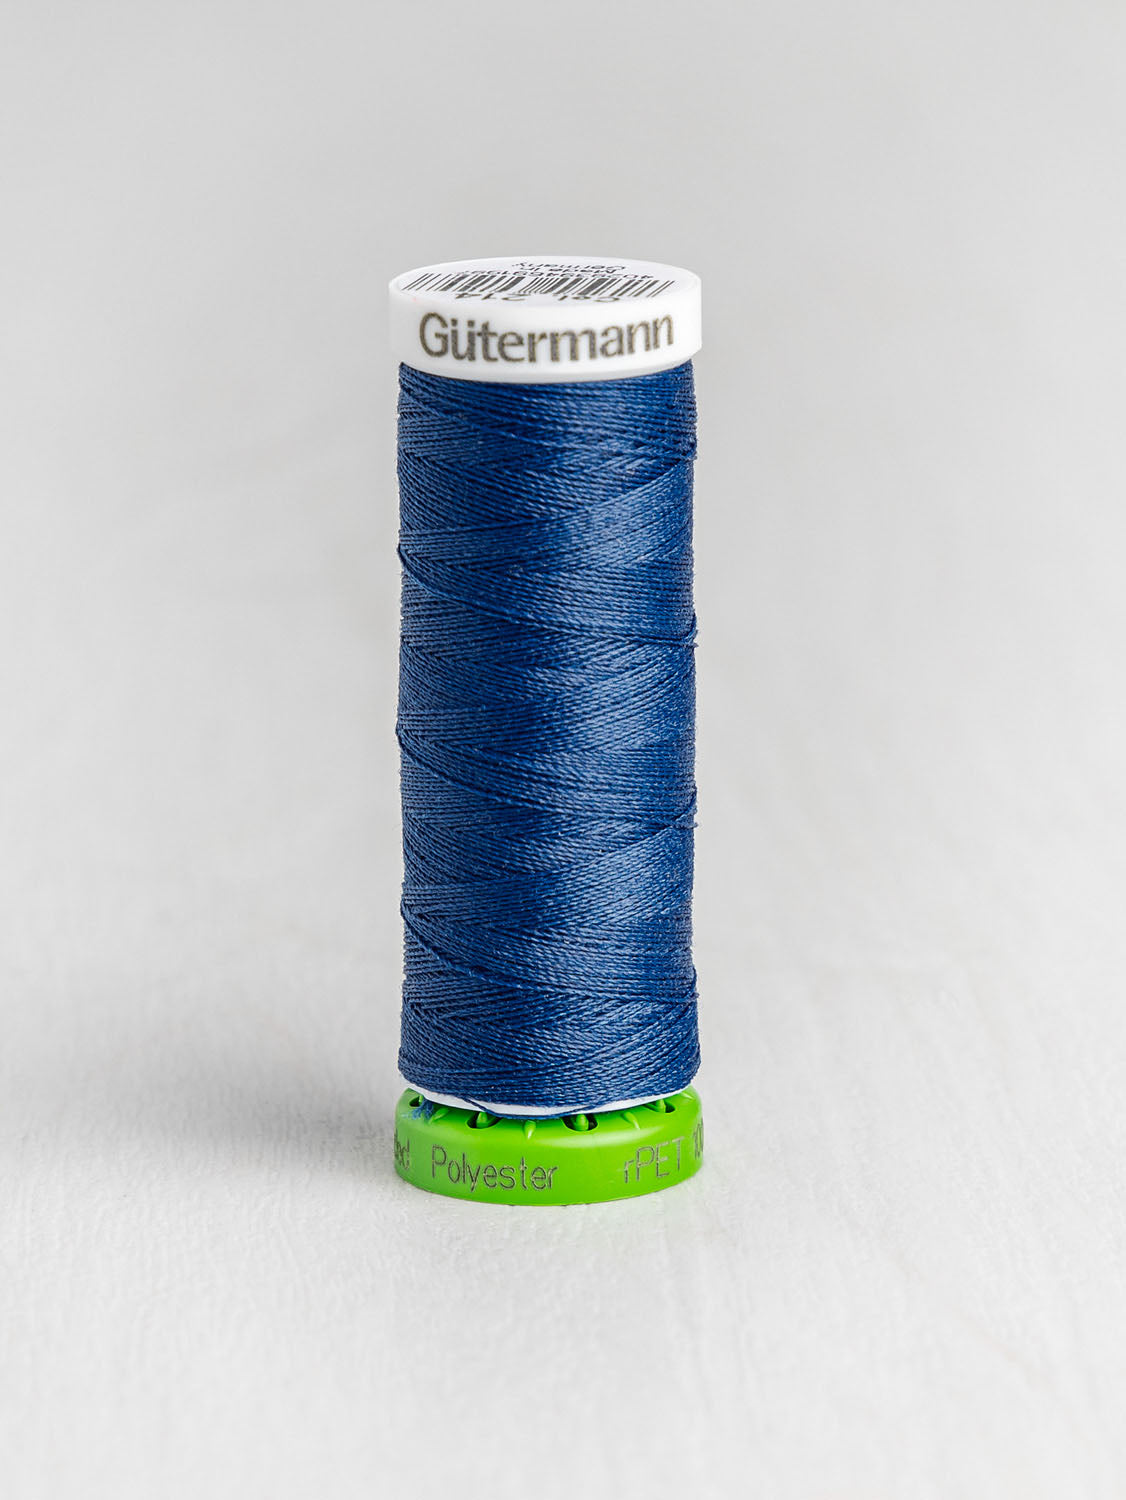 Gütermann All Purpose rPET Recycled Thread - River Blue 214 | Core Fabrics